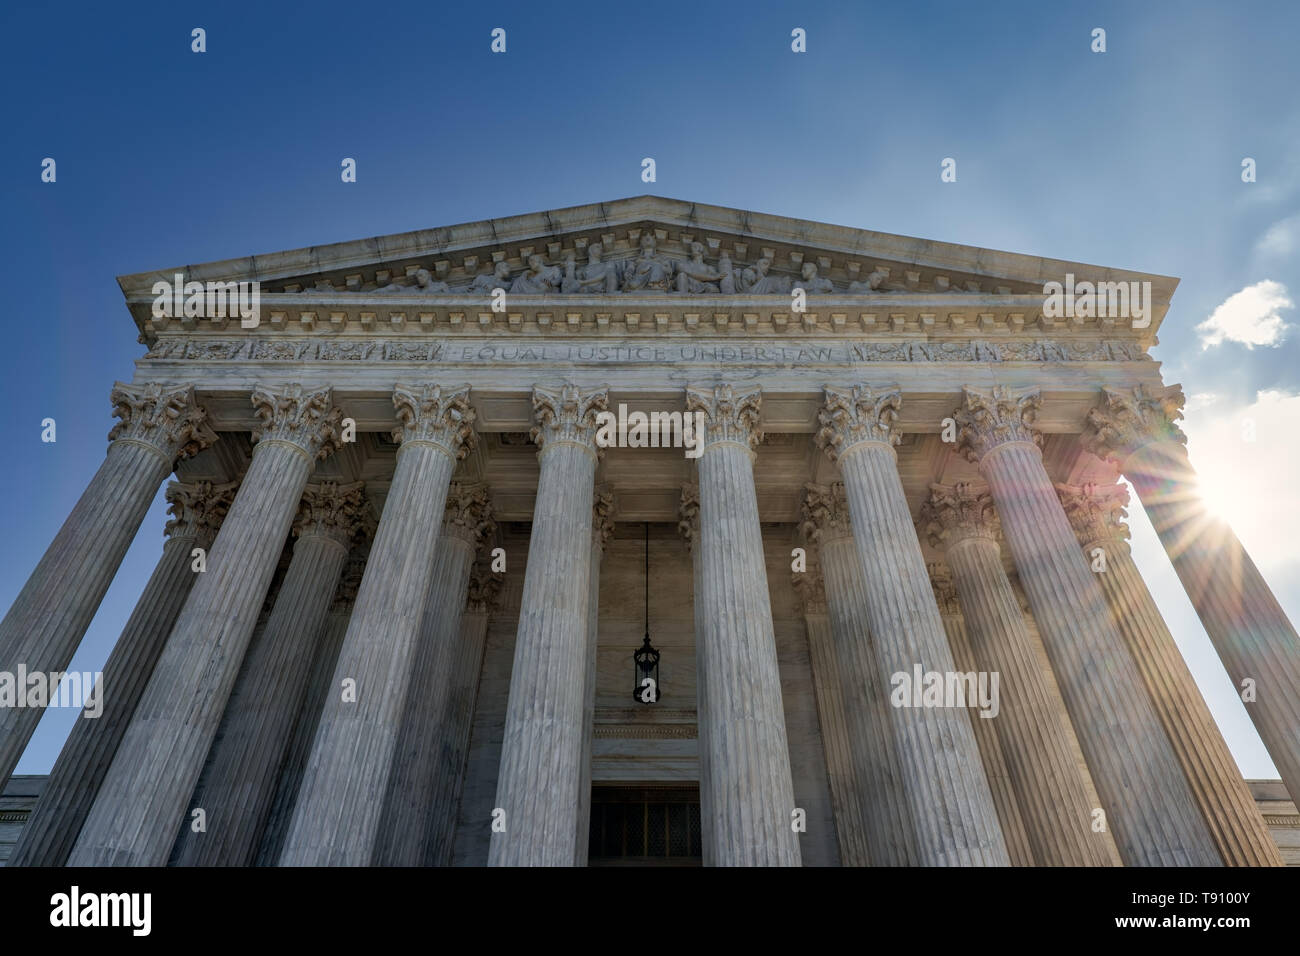 A summer day in front of the US Supreme Court Building in Washington, DC. Stock Photo